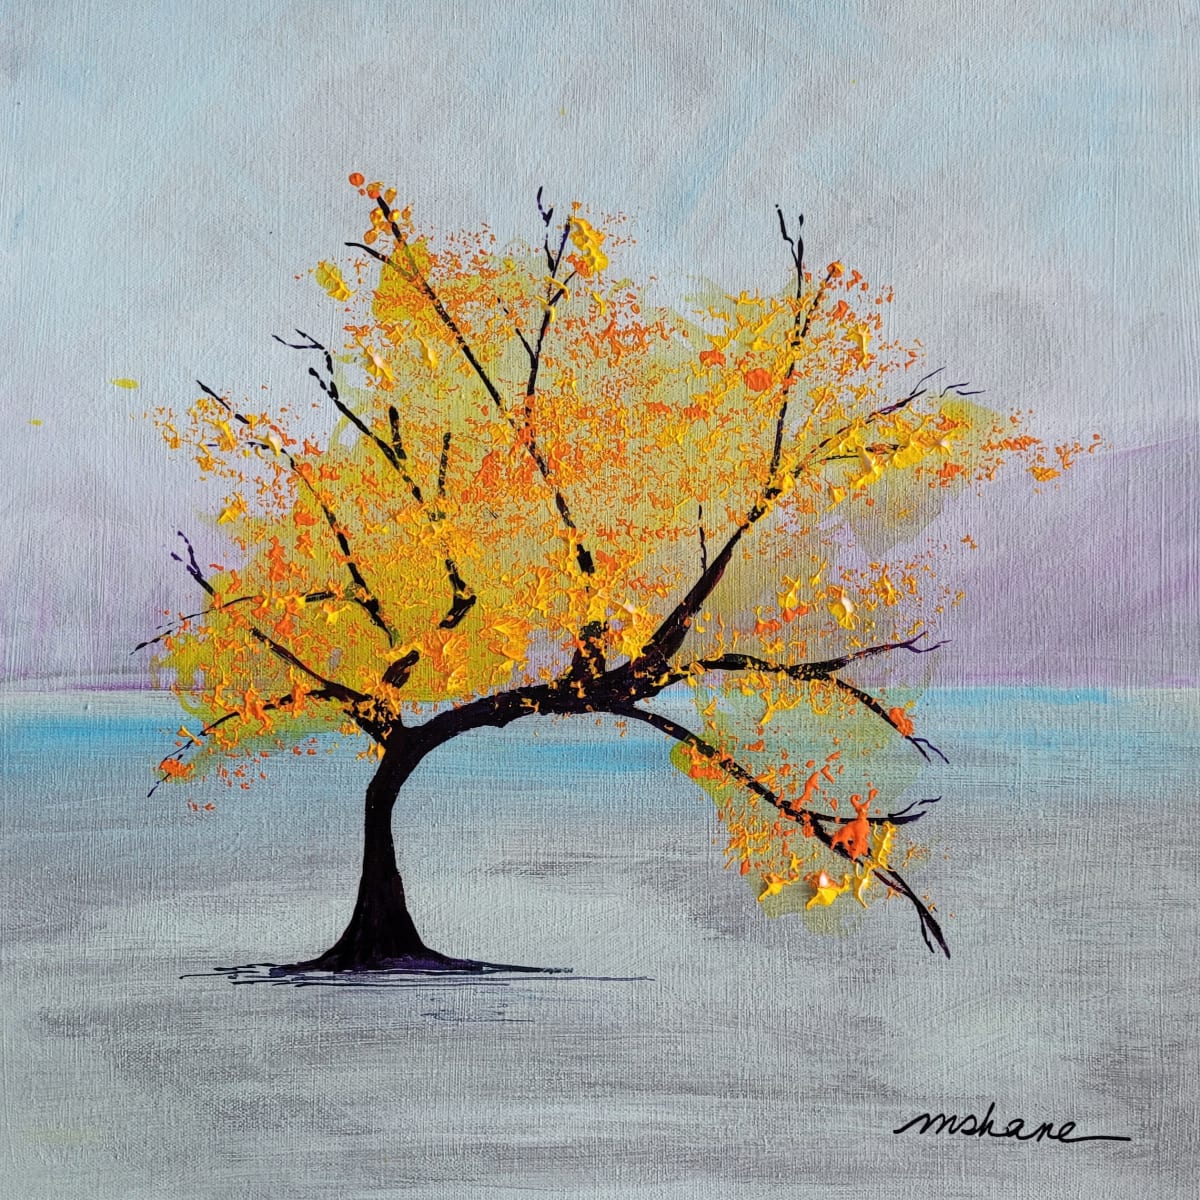 Autumn Dawn by M Shane  Image: Layers of glaze to create a soft backdrop to this autumn tree